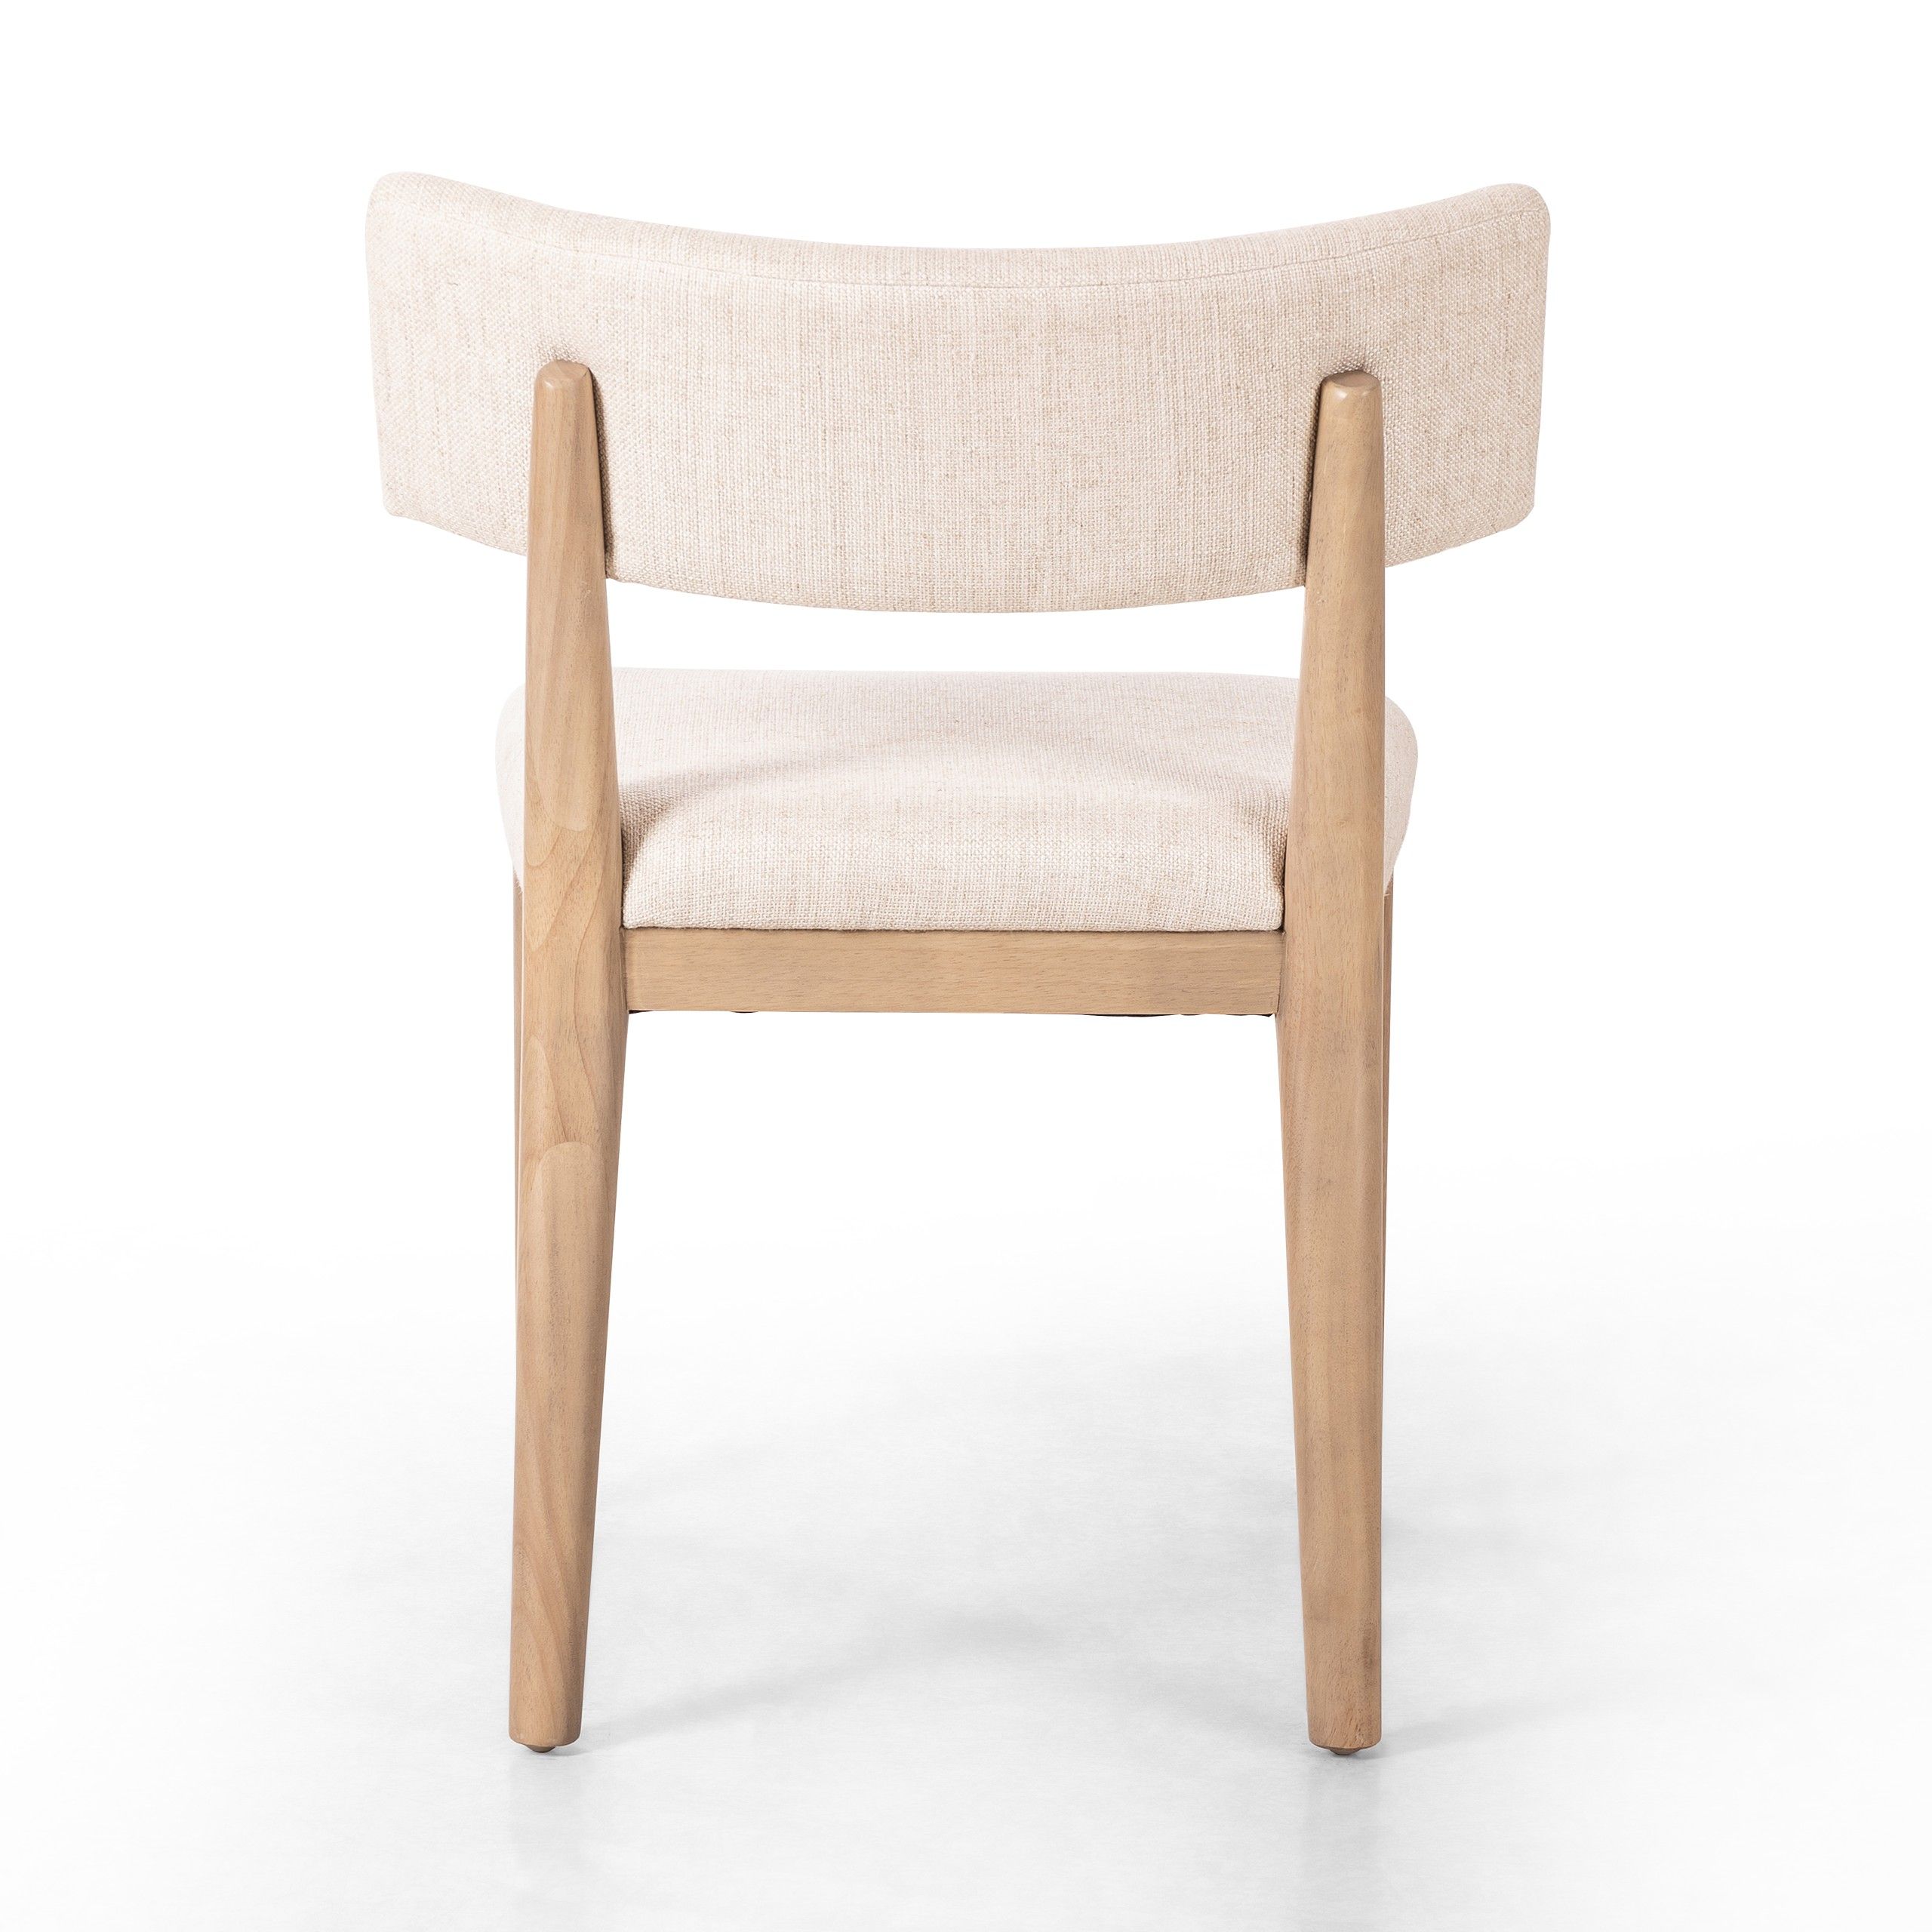 Cardell Dining Chair - Essence Natural back of chair